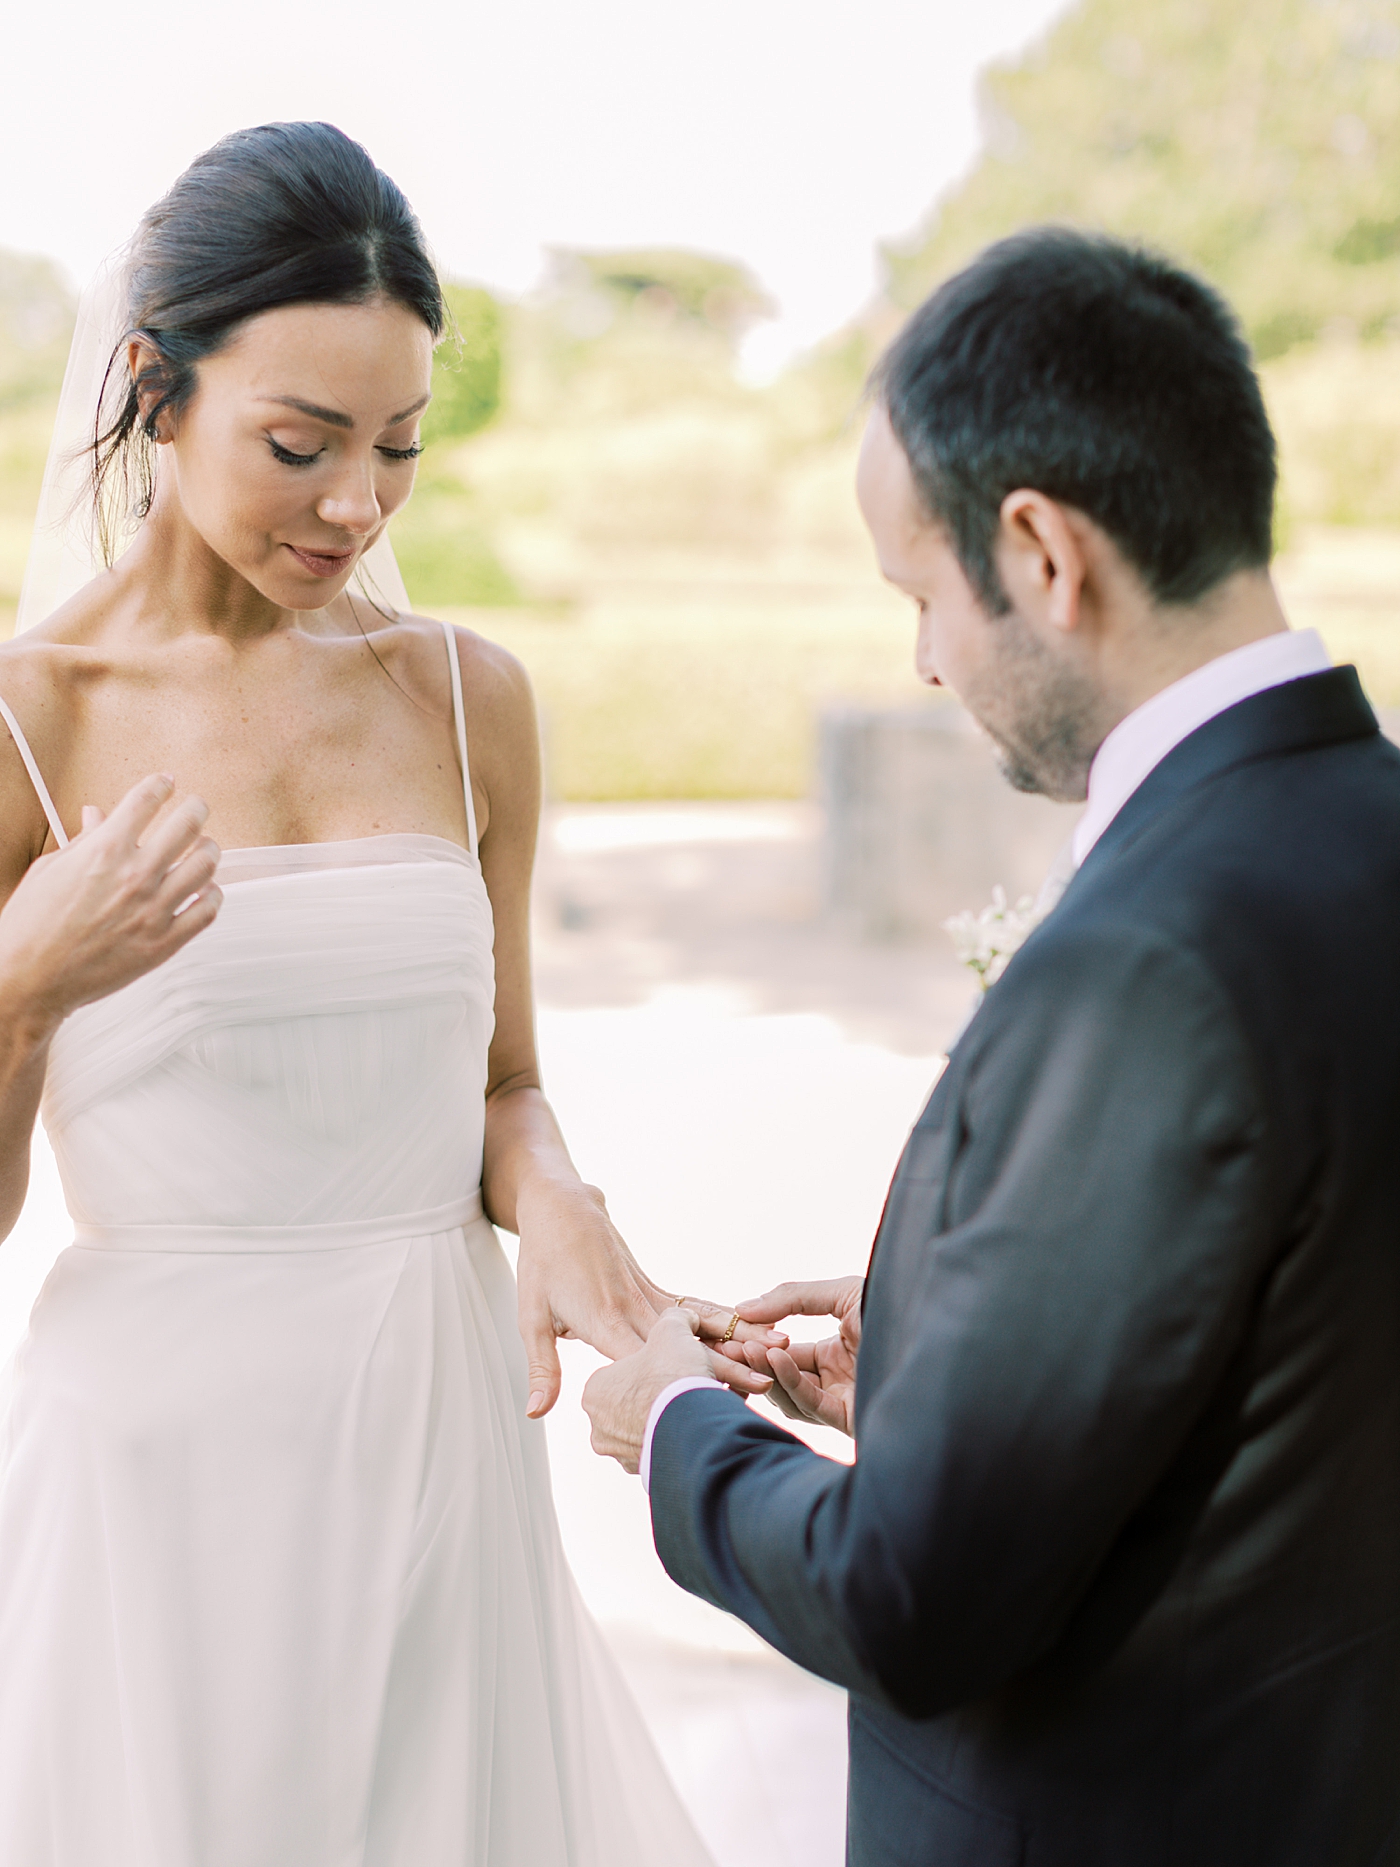 Bride and groom exchanging their rings | Image by Diane Sotero Photography